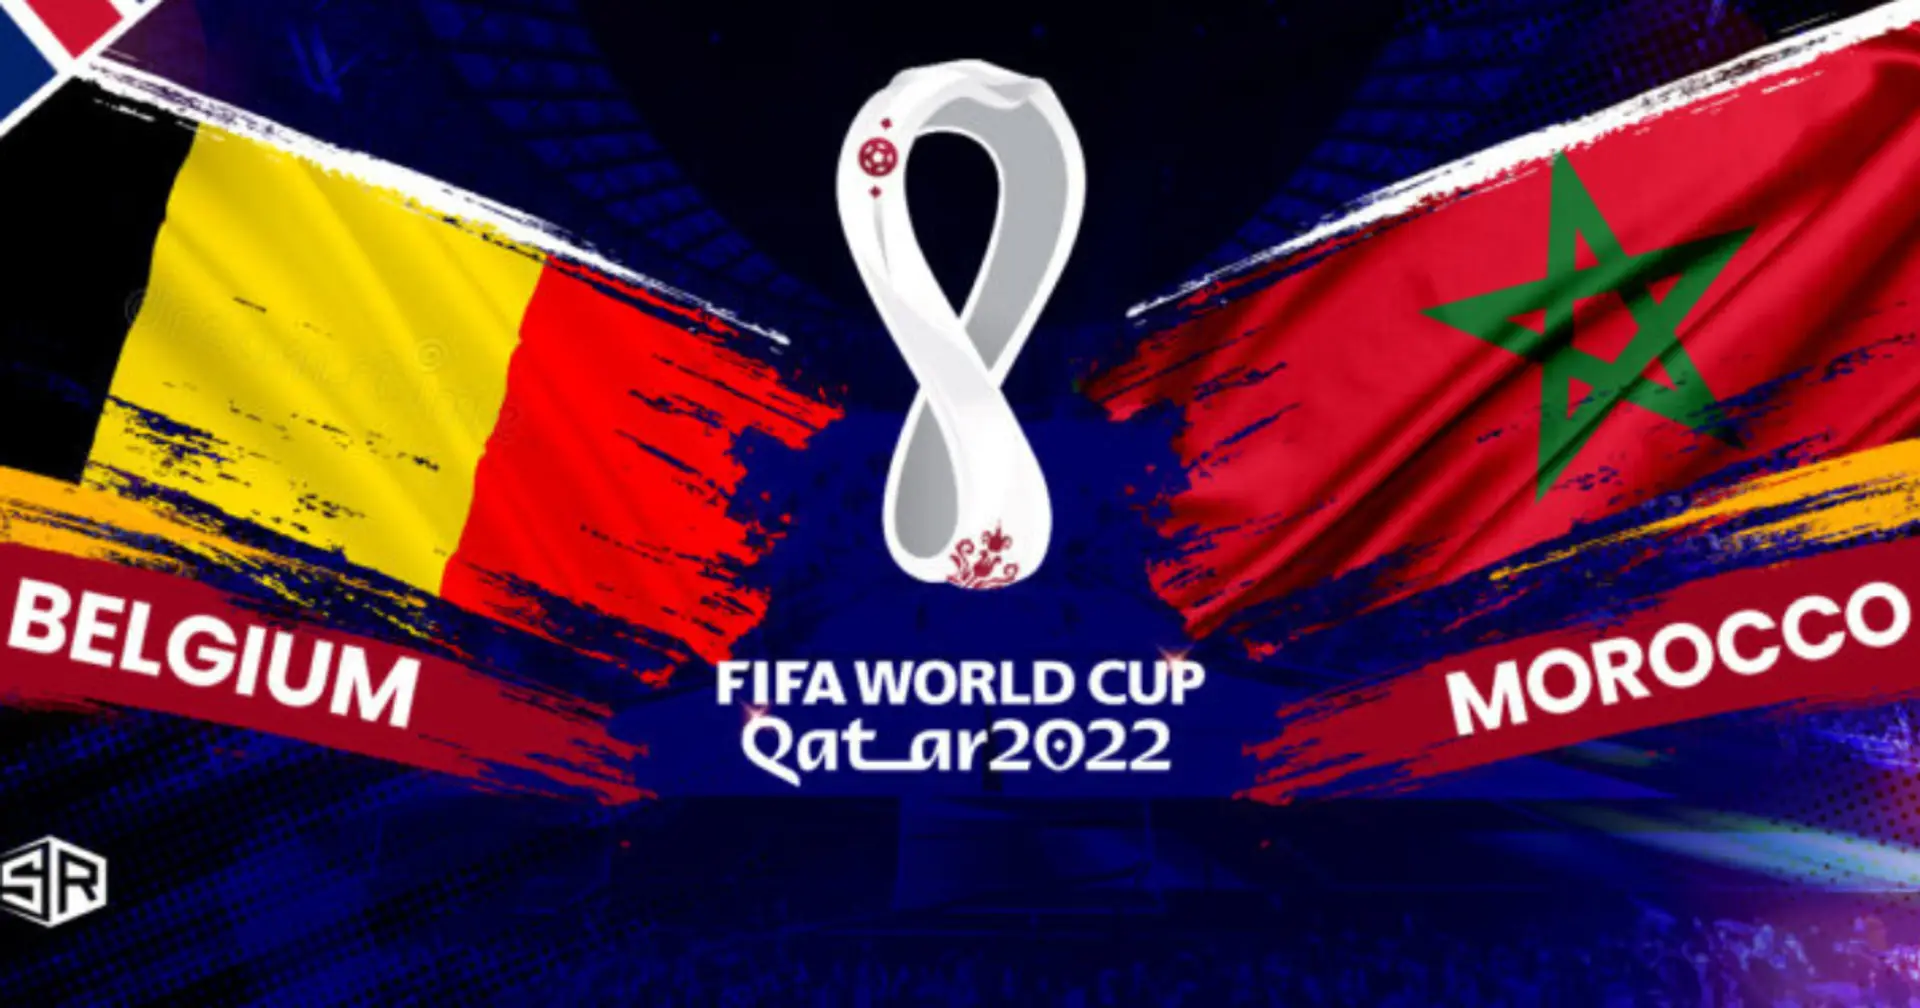 Belgium vs Morocco: Official team lineups for the World Cup clash revealed